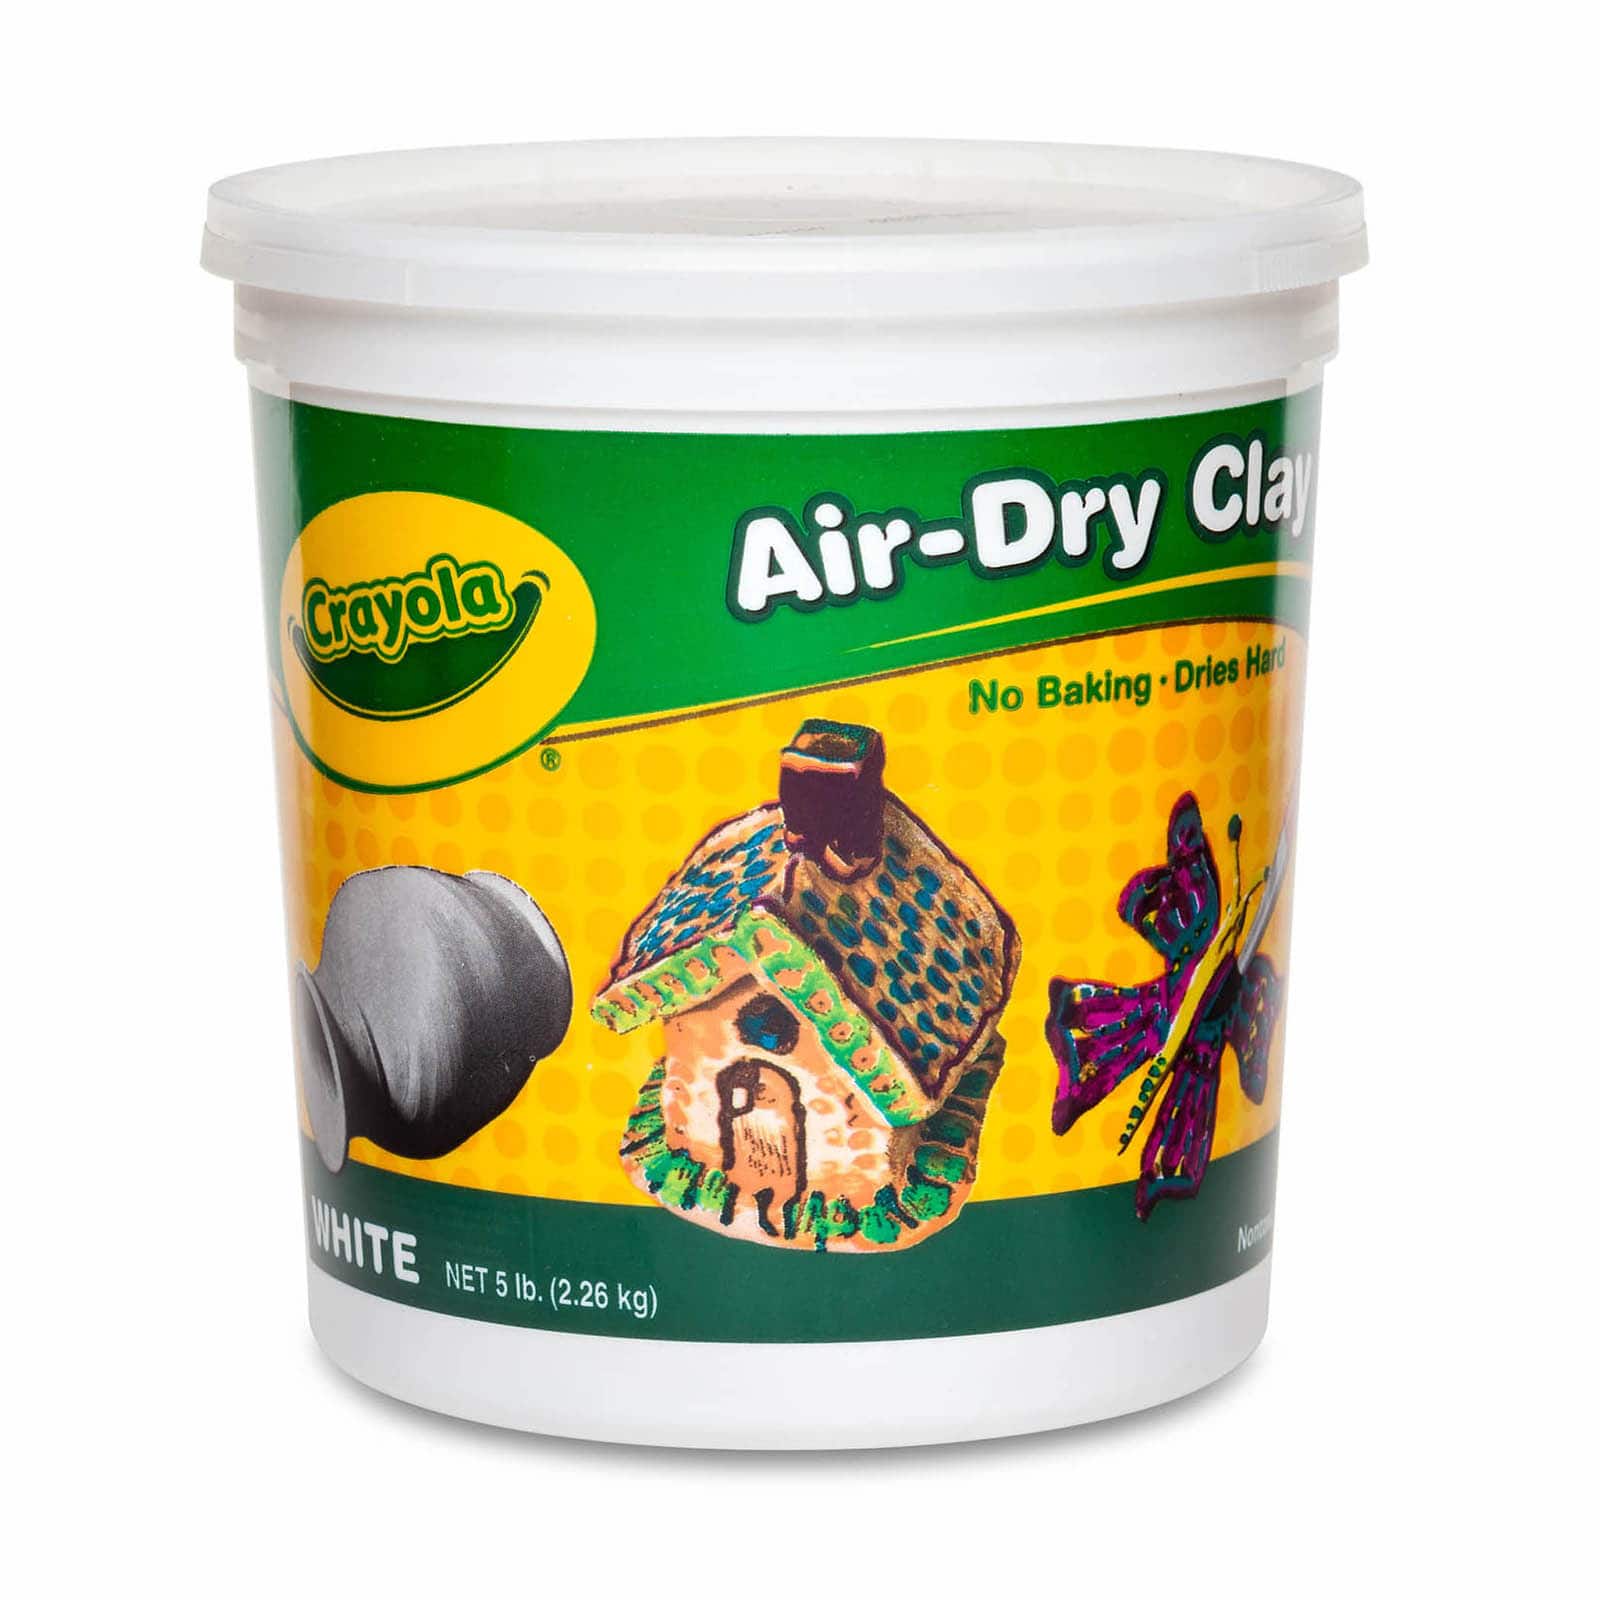 Crayola White Air Dry Clay, 5lb., Michaels